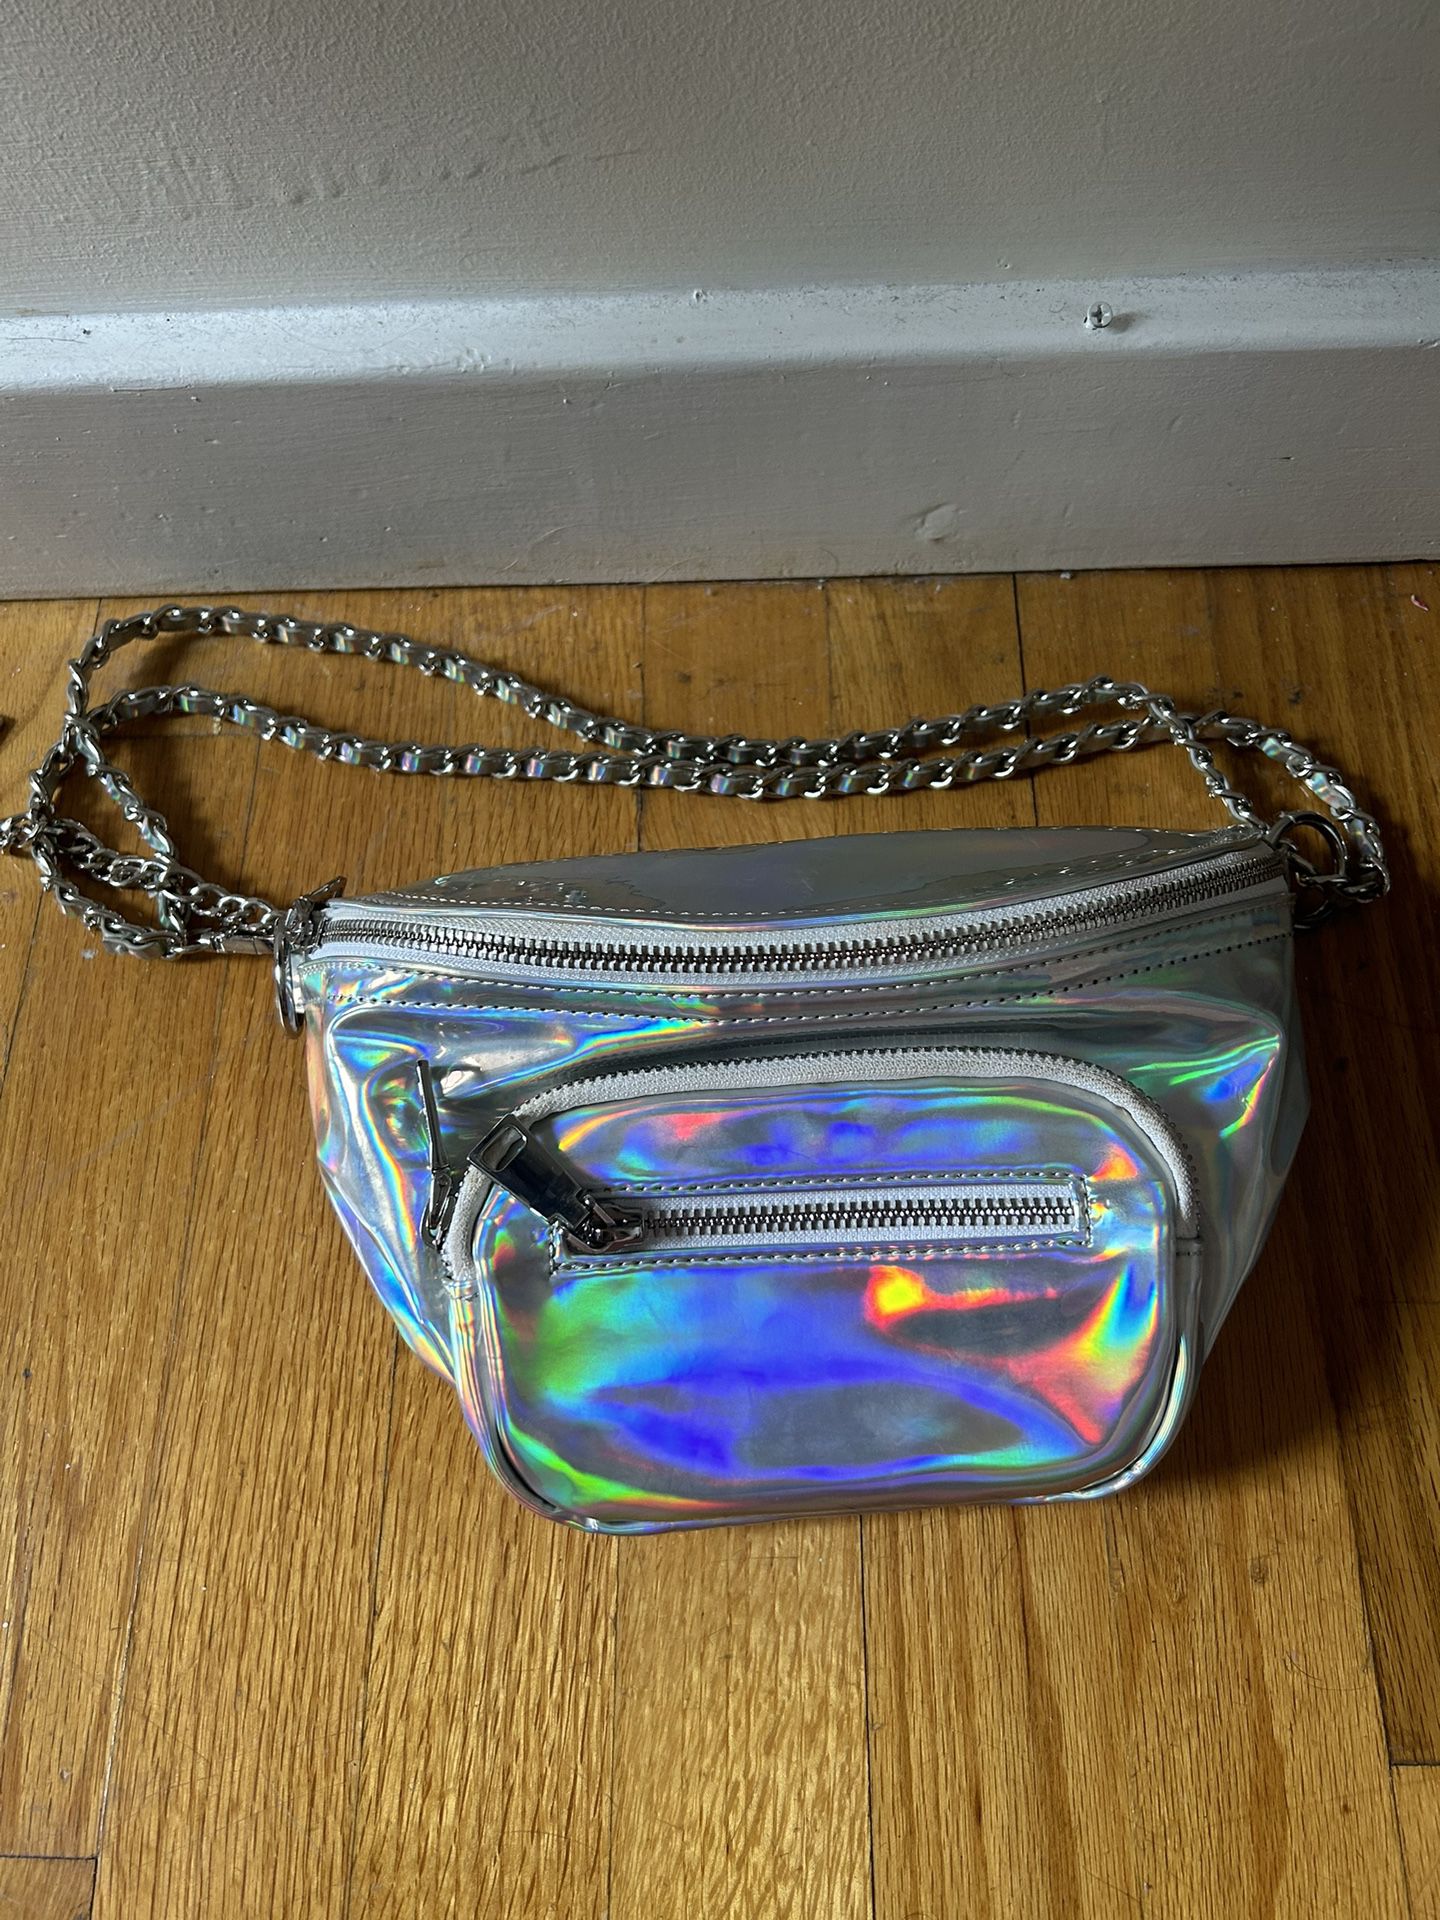 Steve Madden Holographic Waist Bag for Sale in Queens, NY - OfferUp